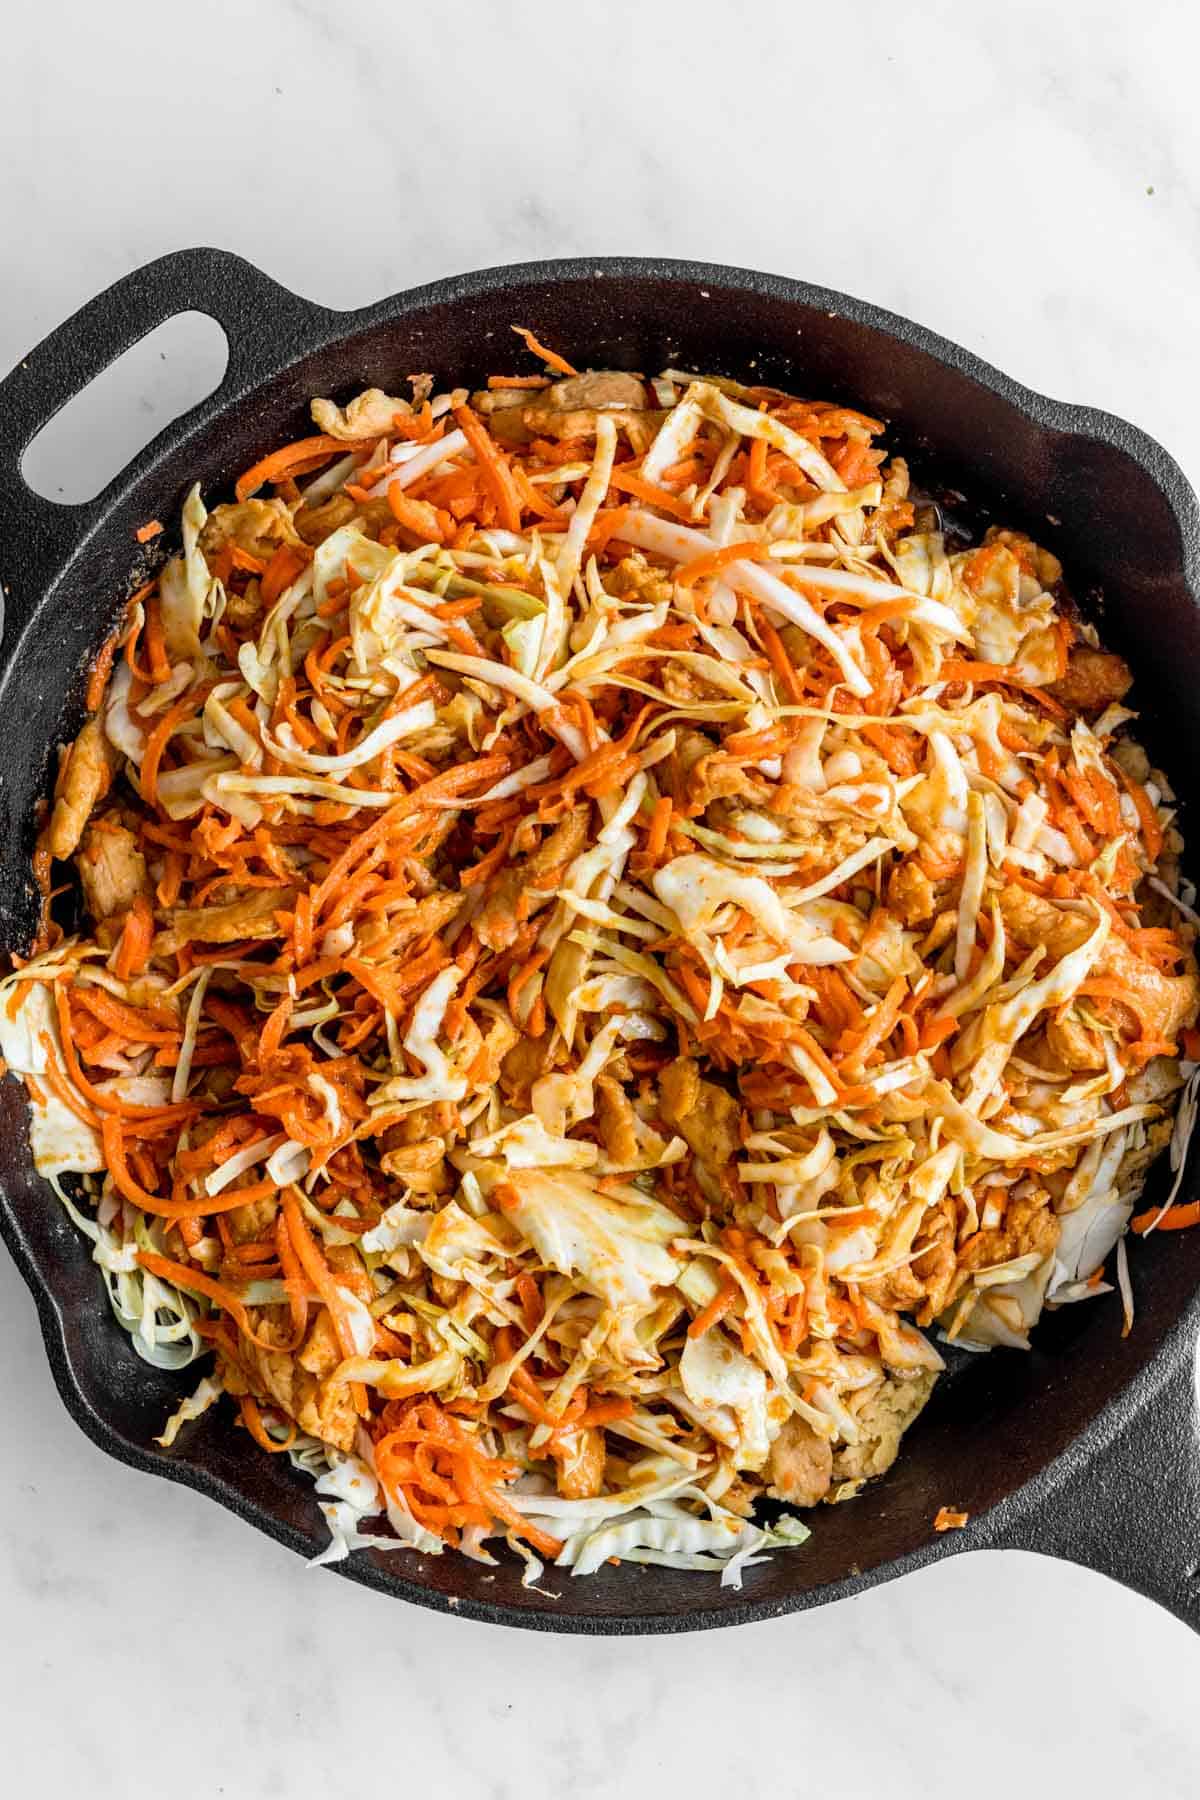 Shredded carrot, cabbage and soy curls tossed in peanut sauce in cast iron skillet.